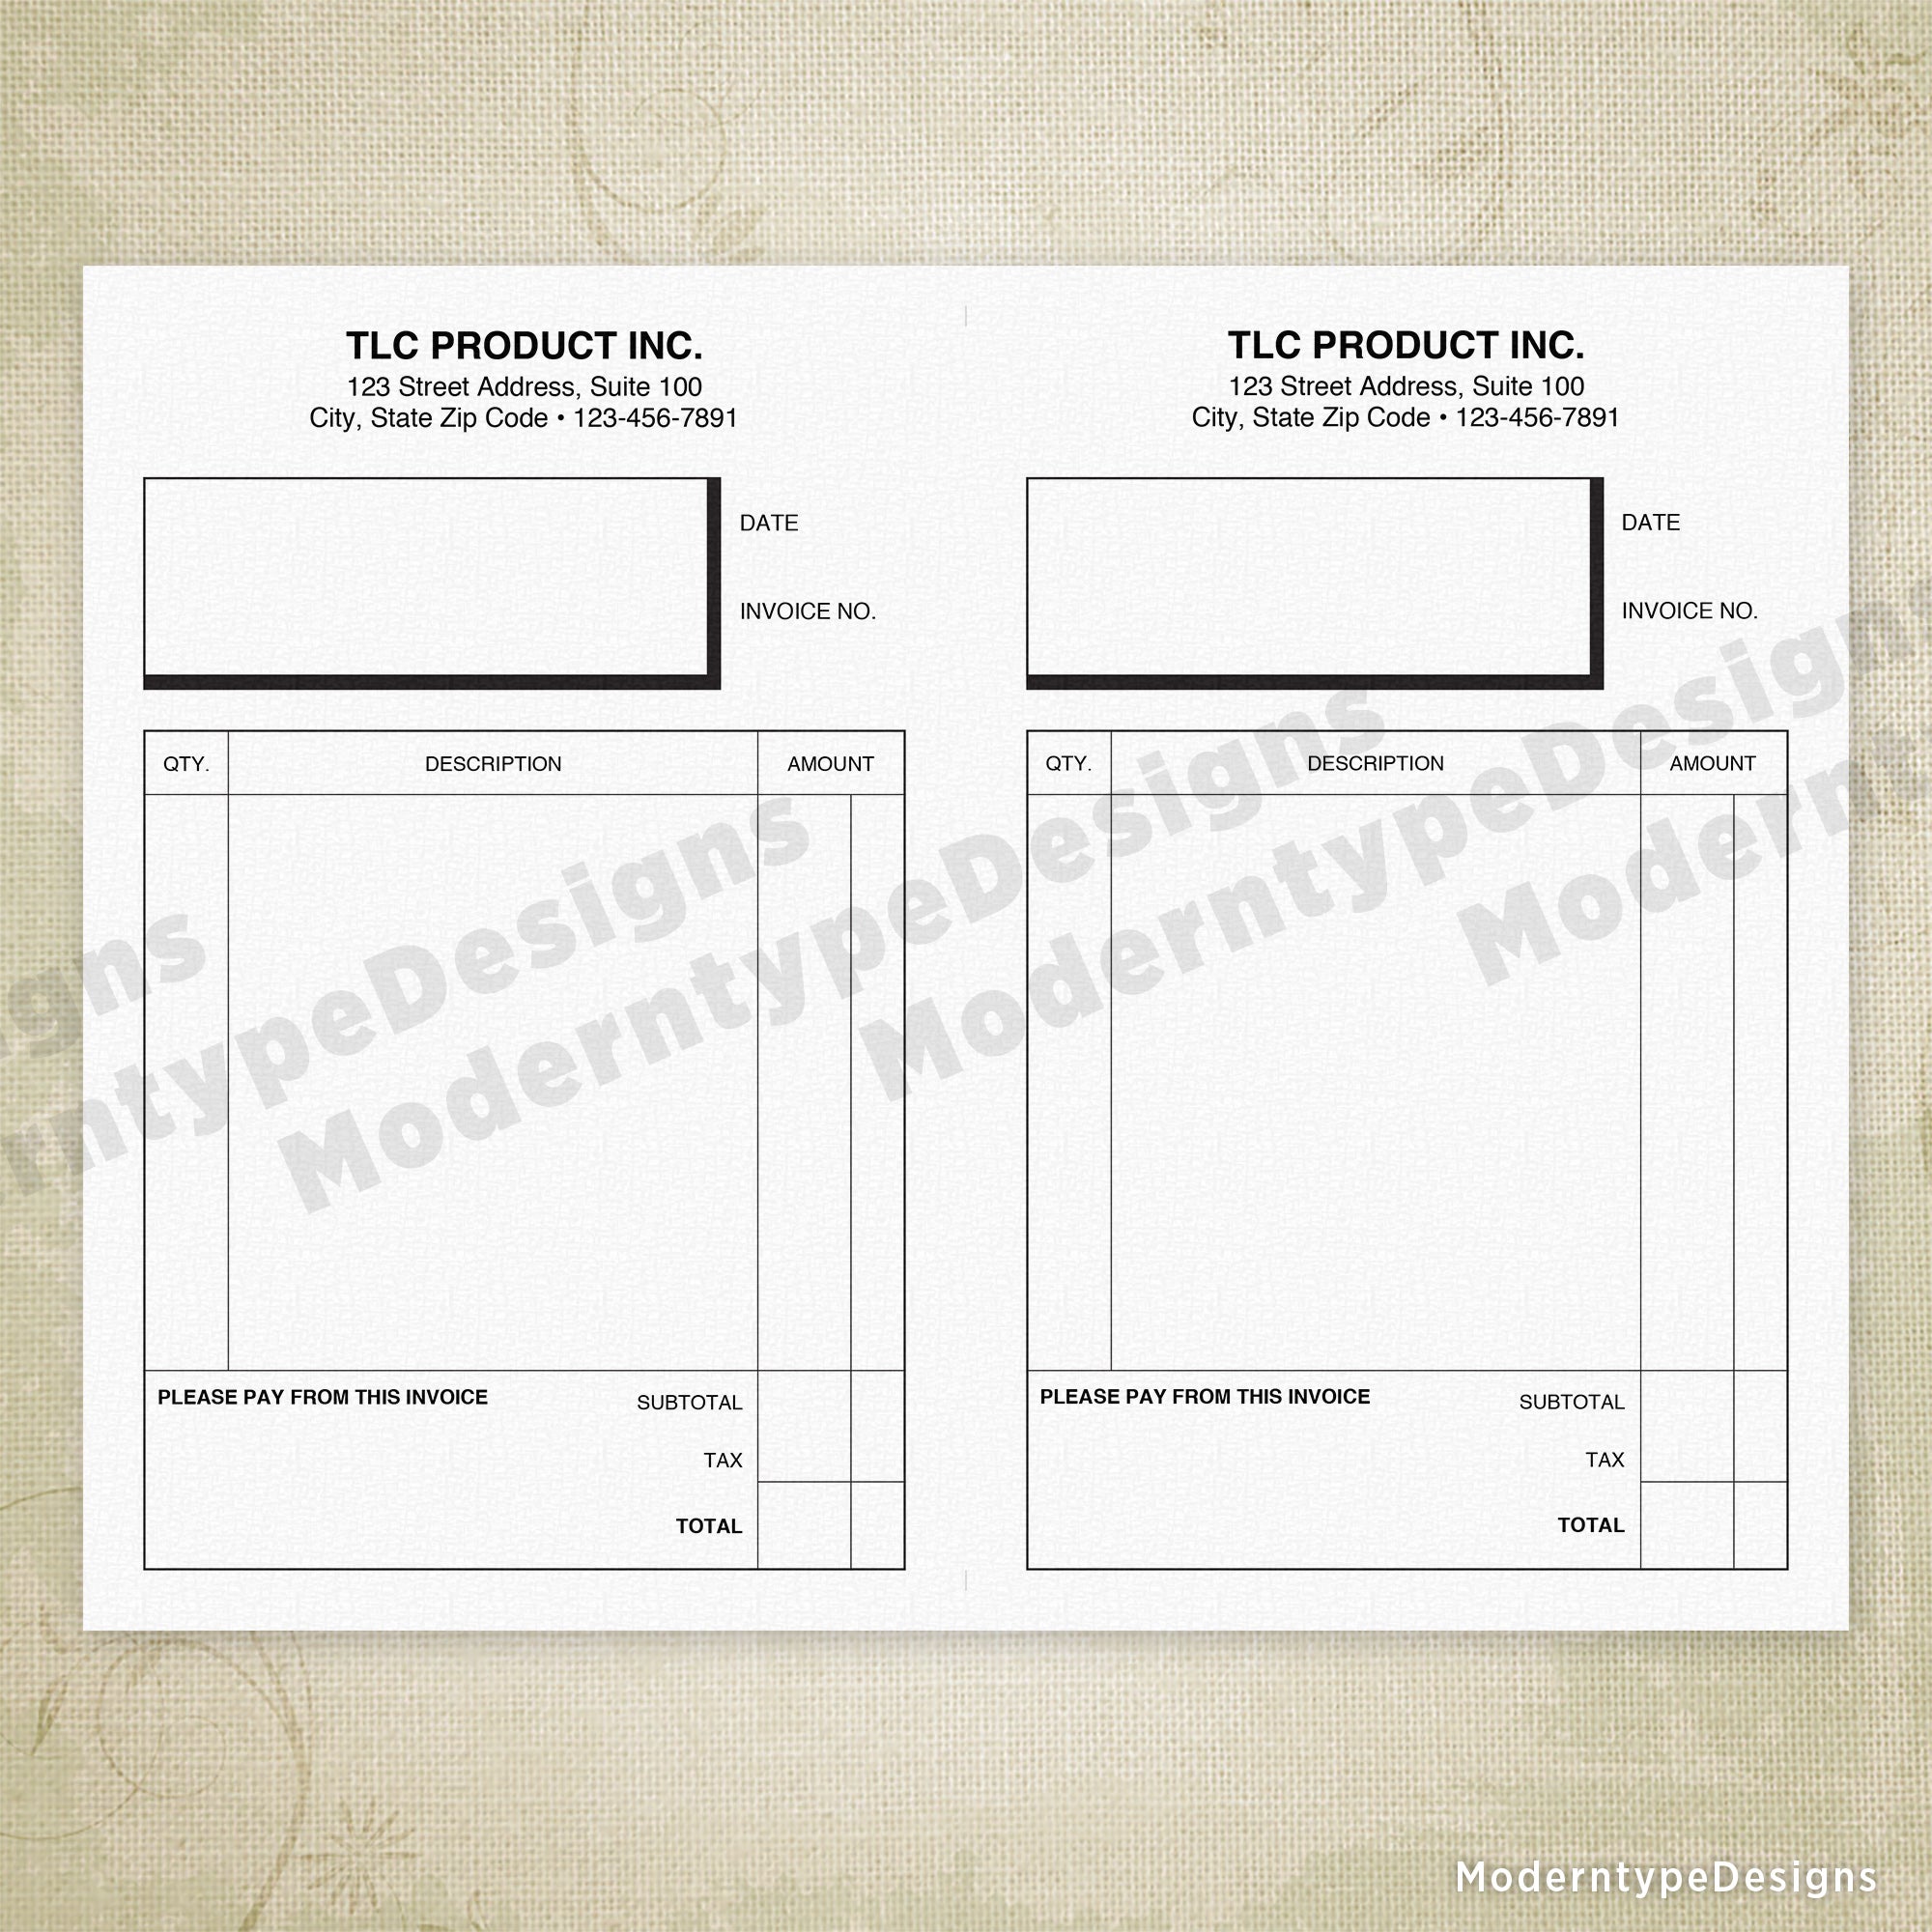 Invoice Form Printable, 5.5 x 8.5" Half Sheet, Personalized, #1